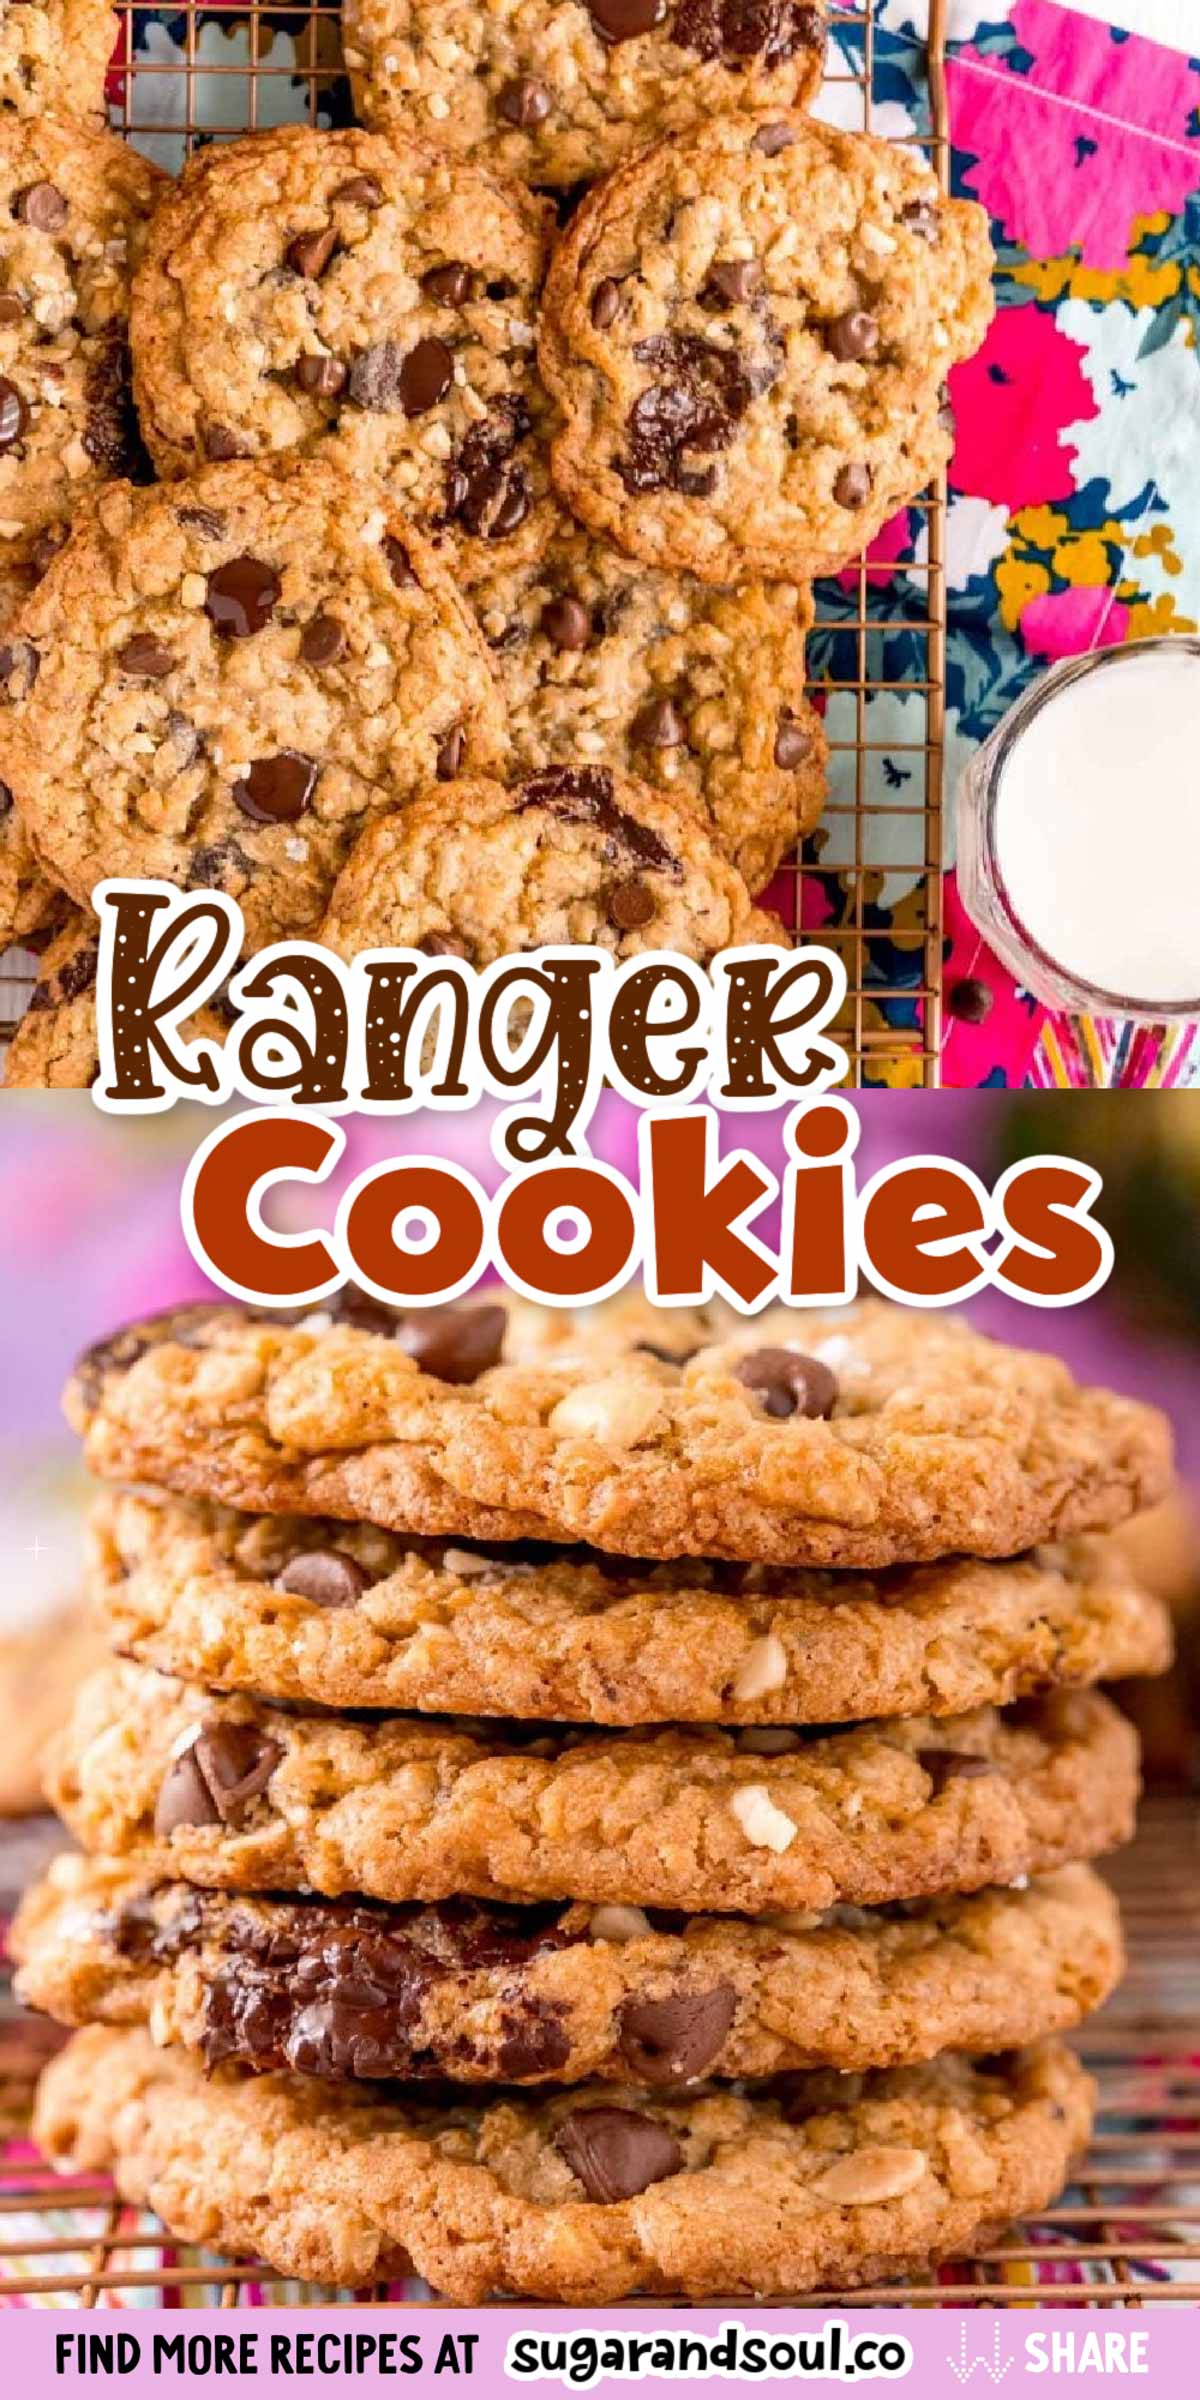 This Ranger Cookies Recipe is my favorite version of a classic! Made with oats, Rice Krispies, coconut, peanuts, and chocolate chips, these chewy cookies are filled with delicious flavors and textures!  via @sugarandsoulco